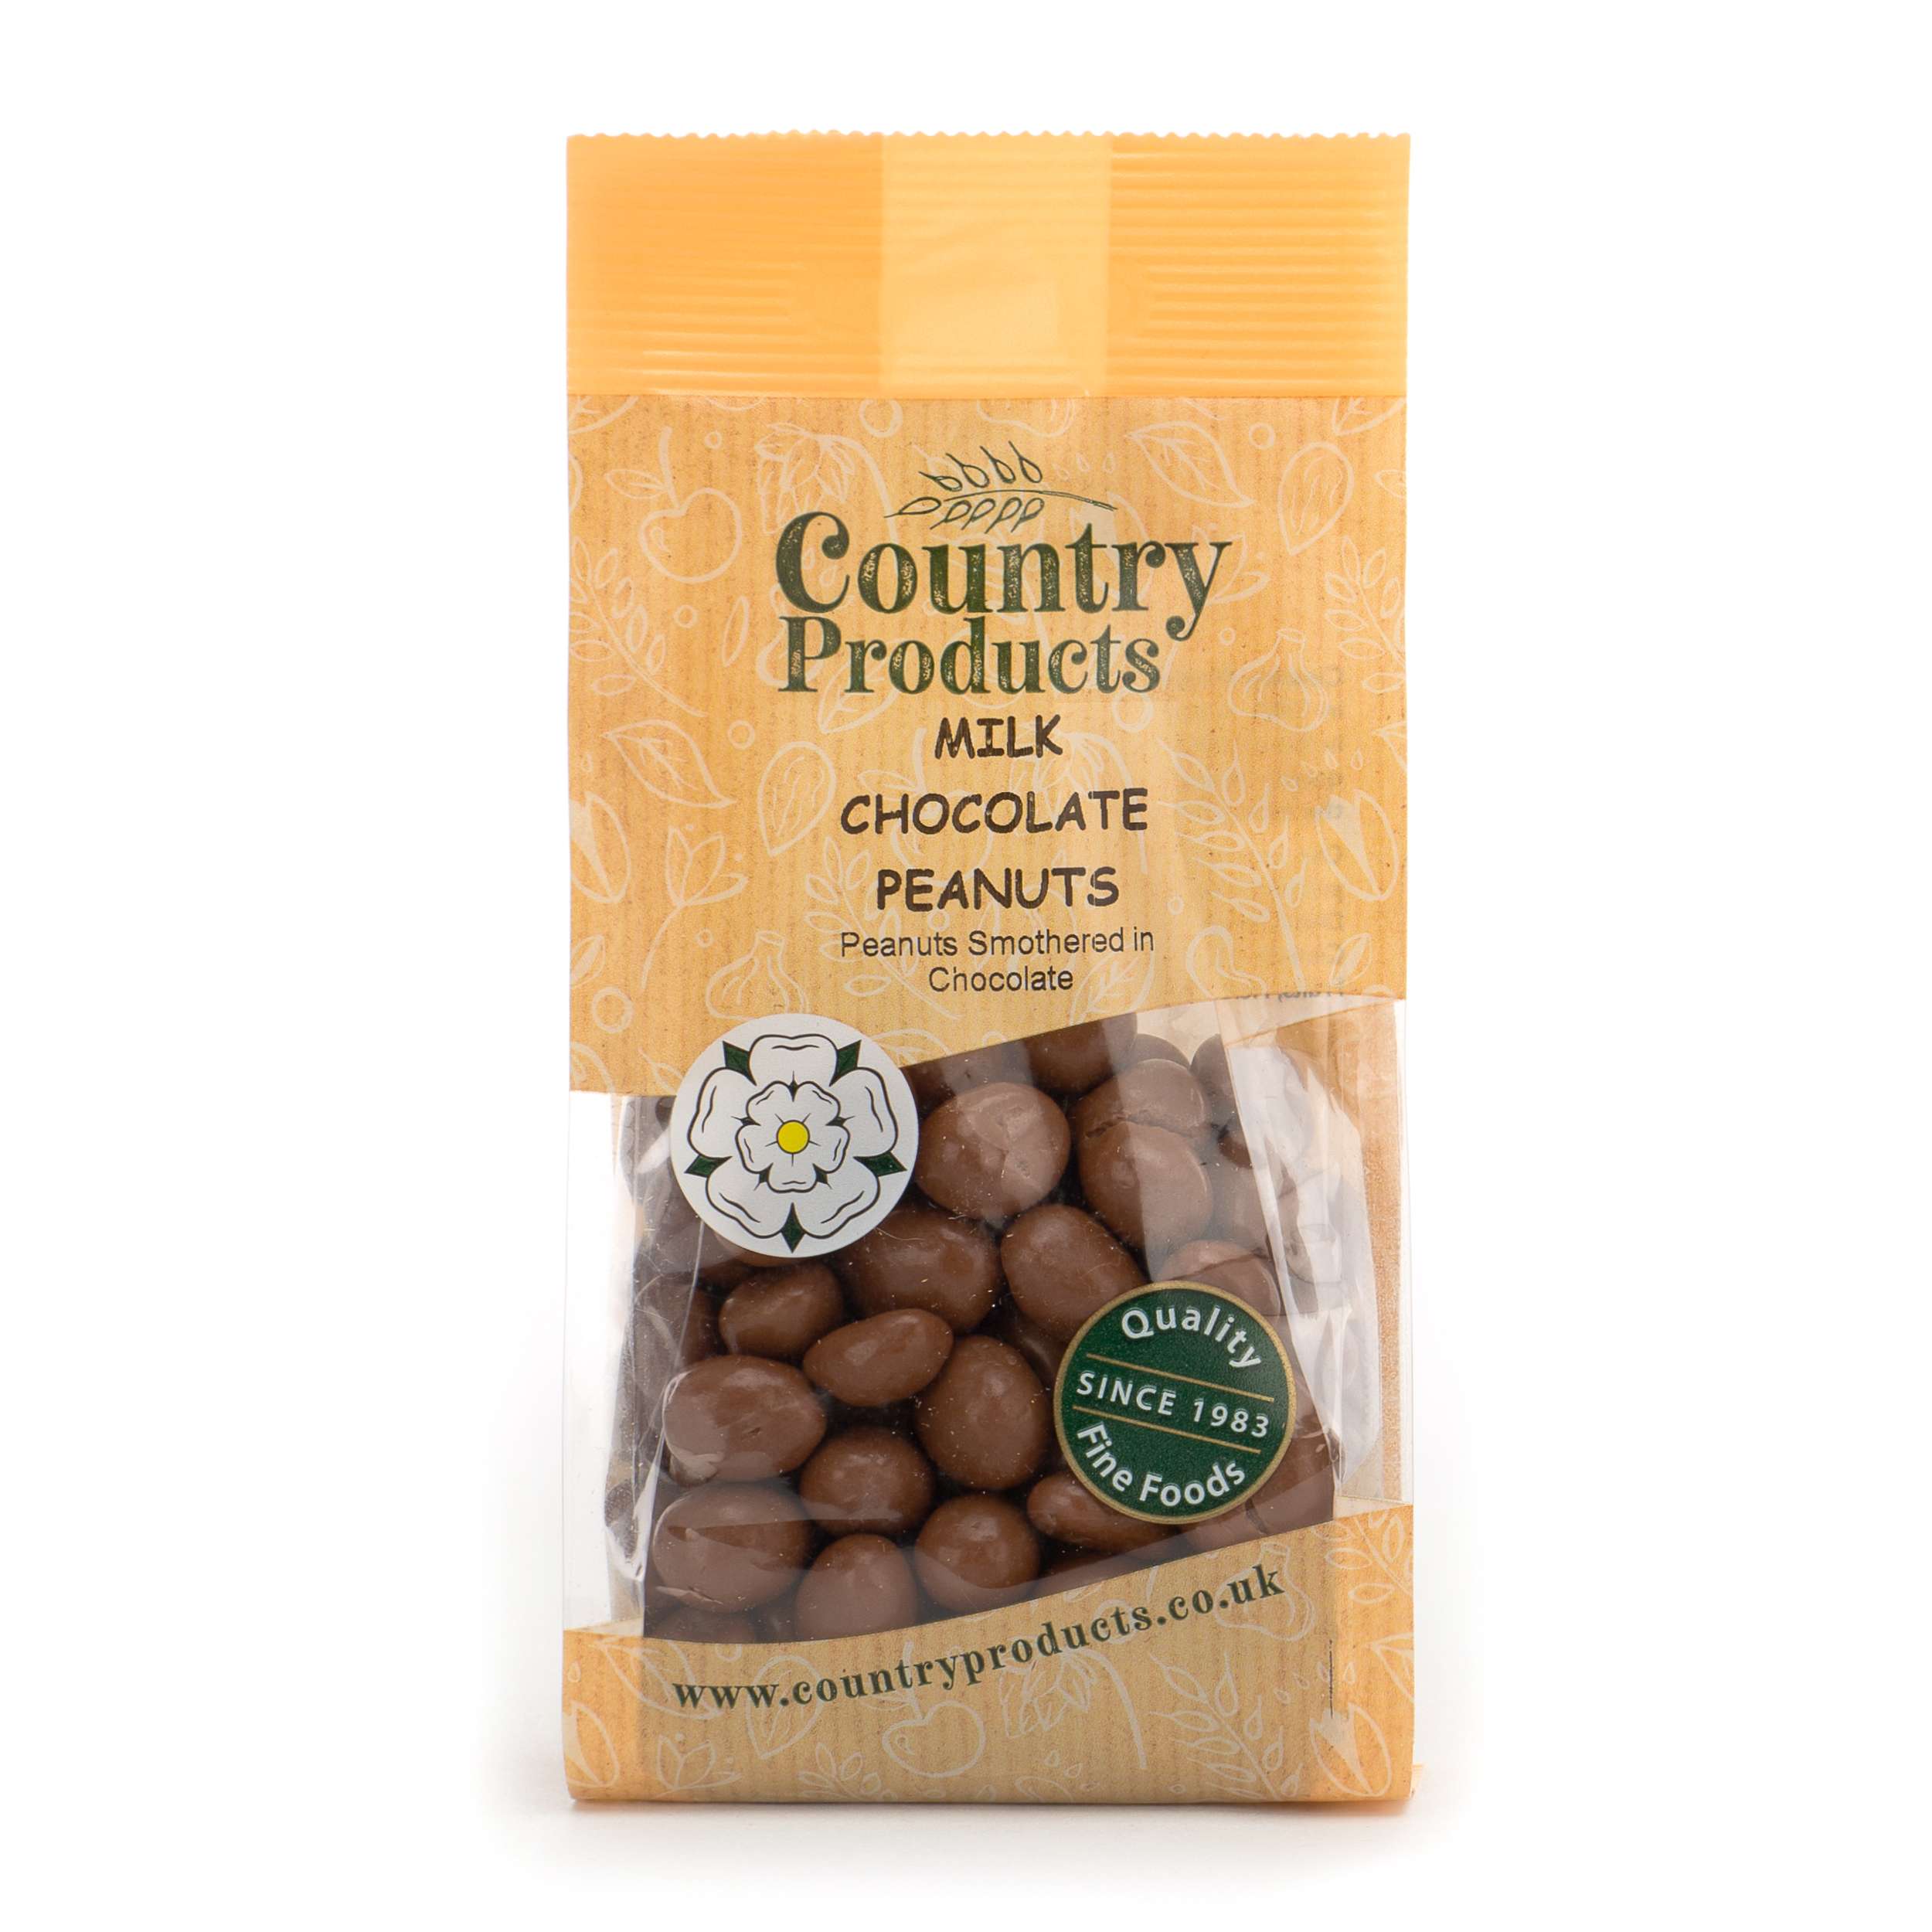 Country Products Milk Chocolate Peanuts